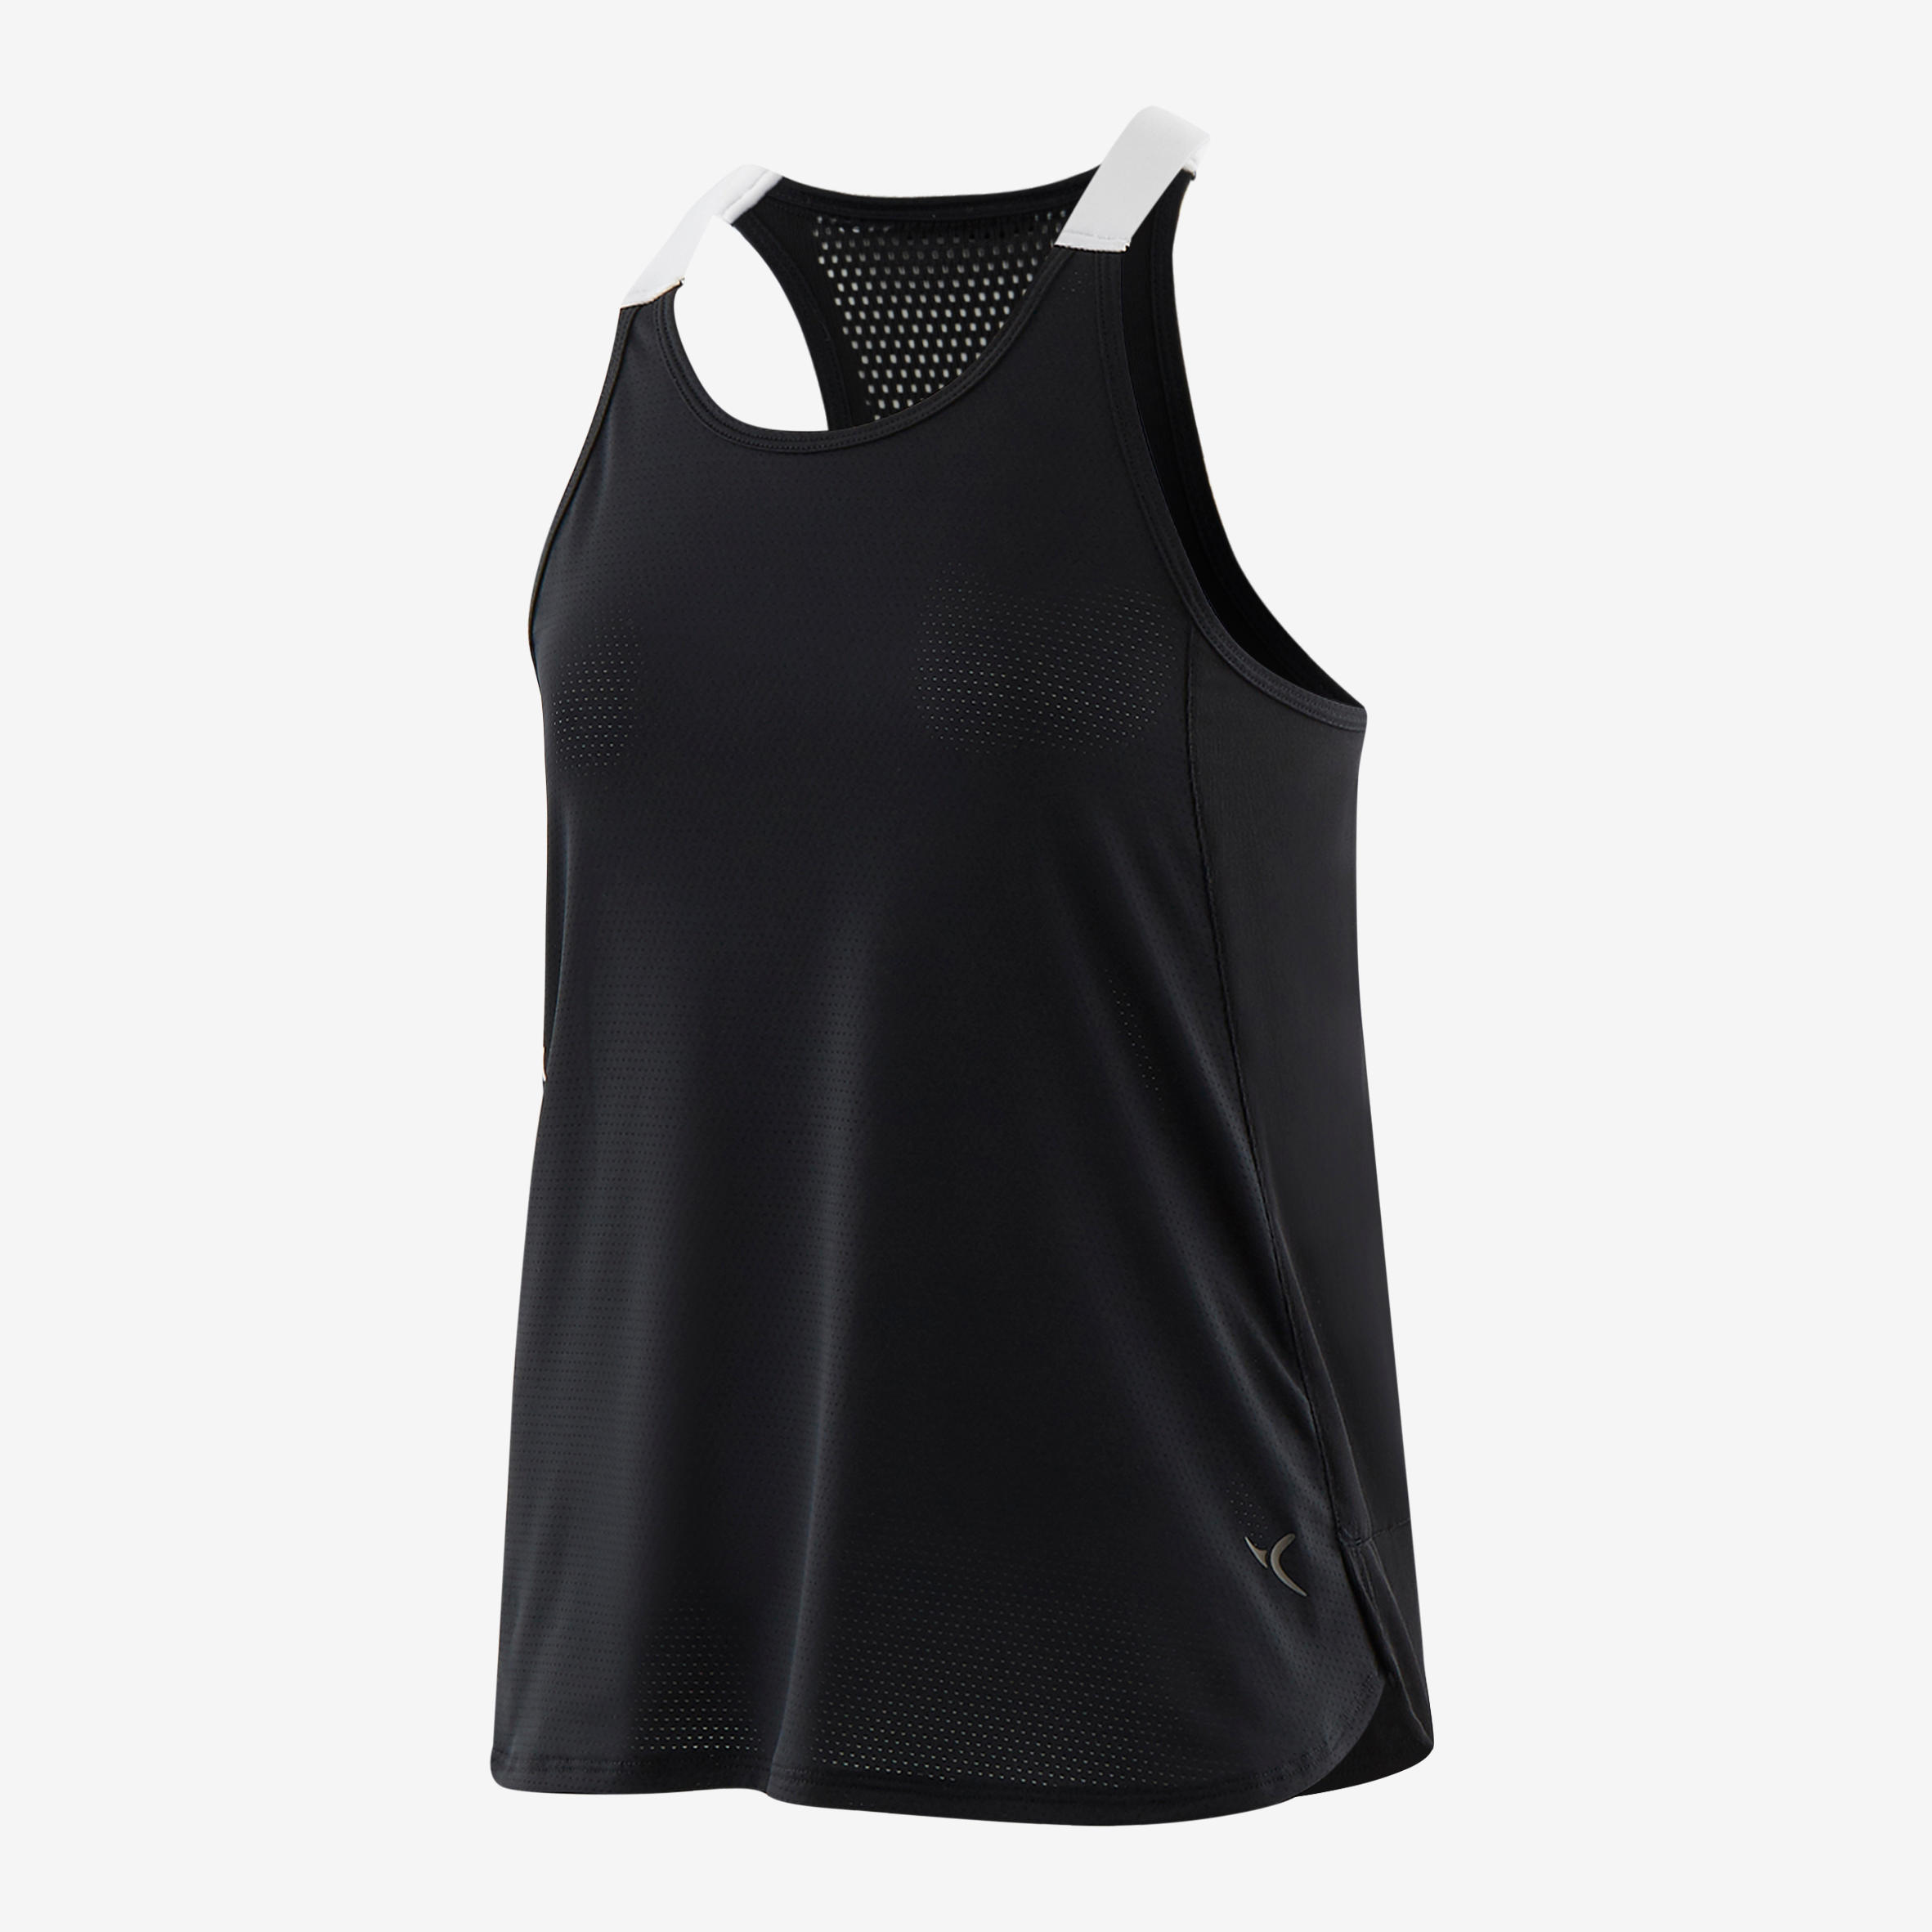 Girls' Technical Breathable Tank Top - Black/White 2/4